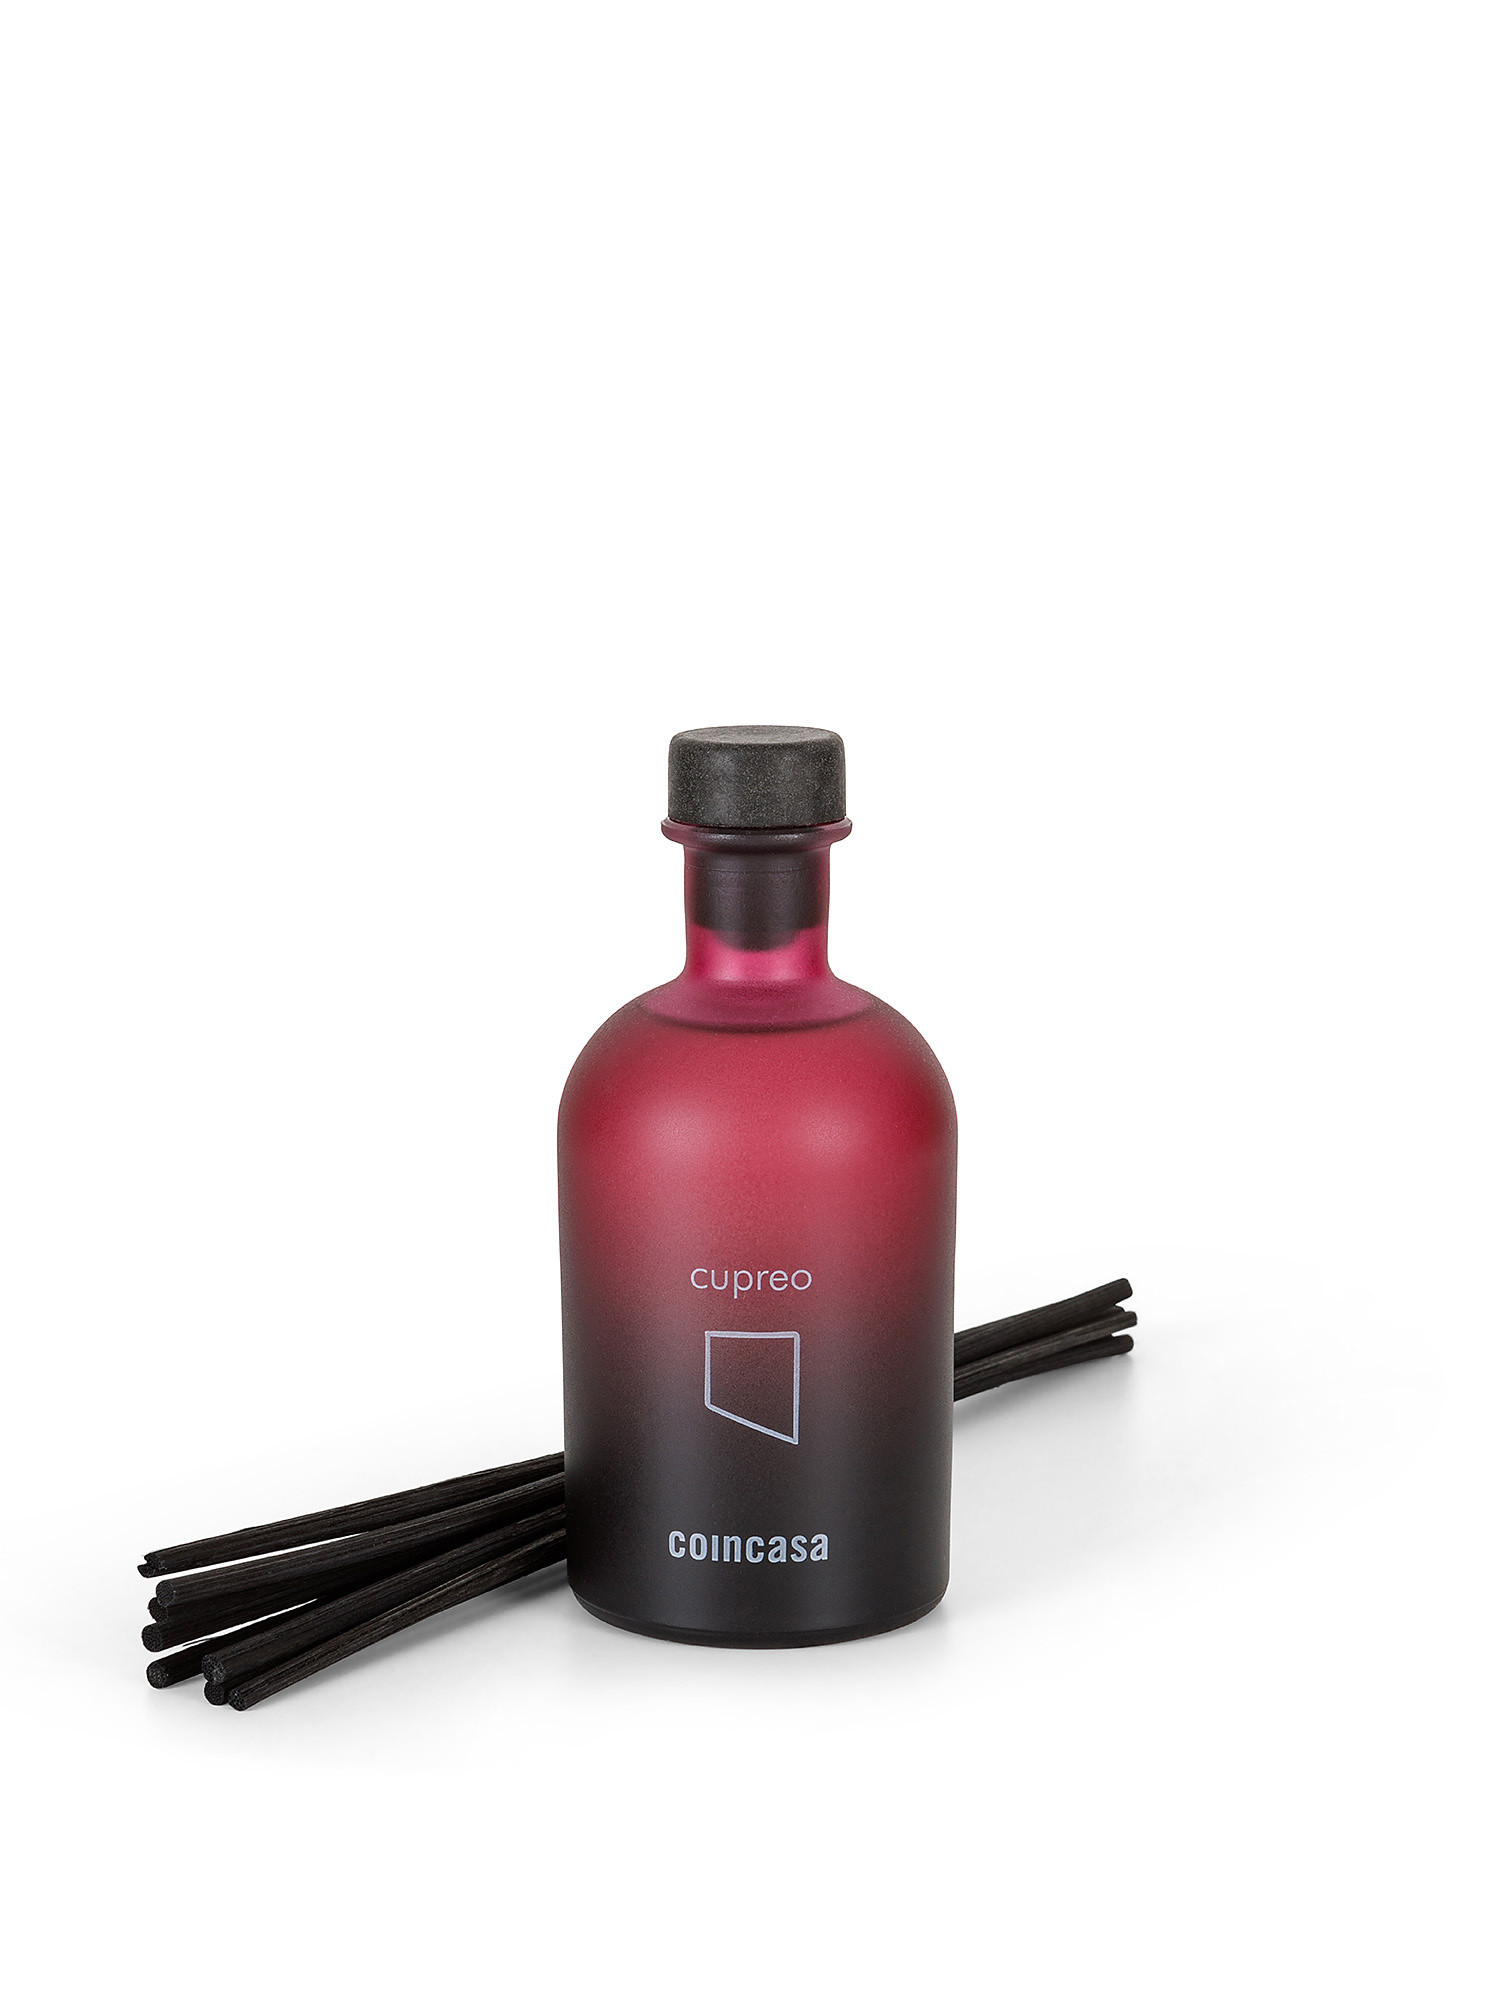 Cupreo Diffuser - Black Pomegranate 250ml, Black, large image number 0